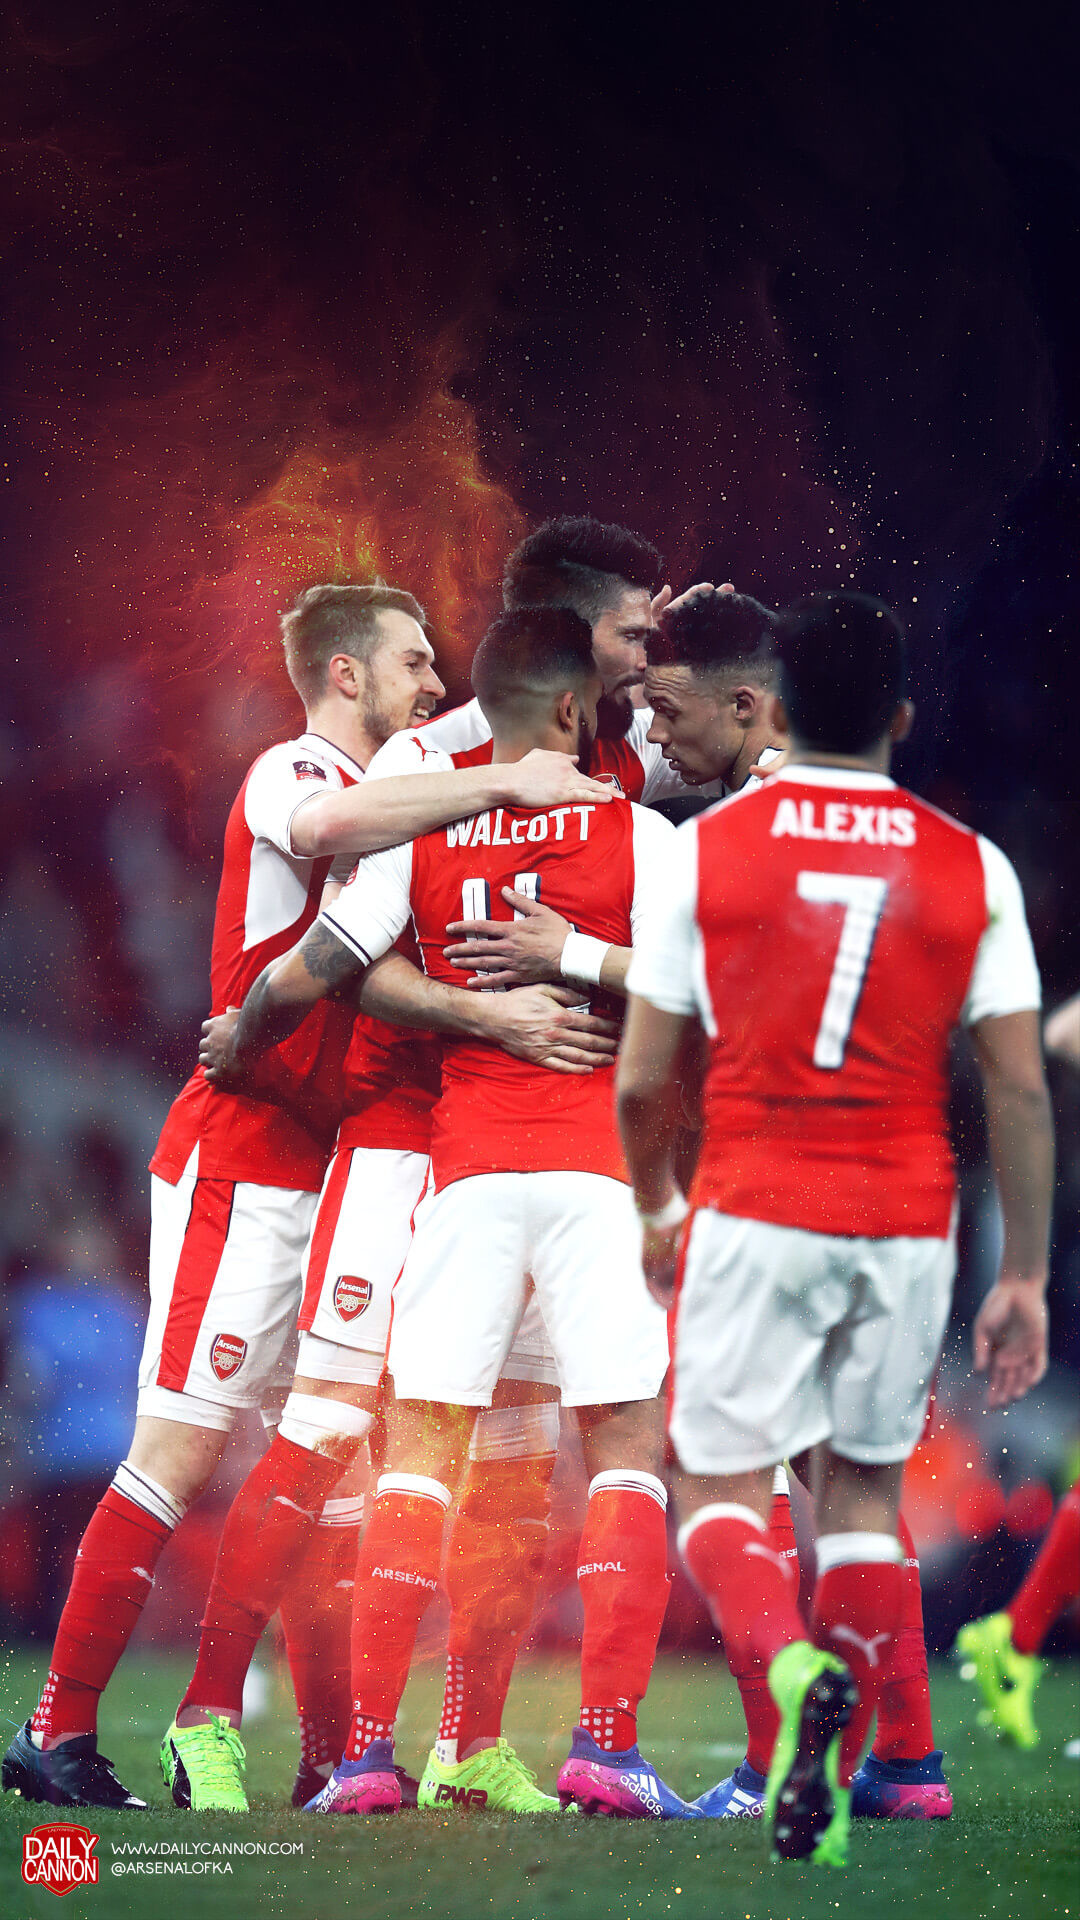 1080x1920 Hope you like them, even if you don't like Arsenal at the moment.